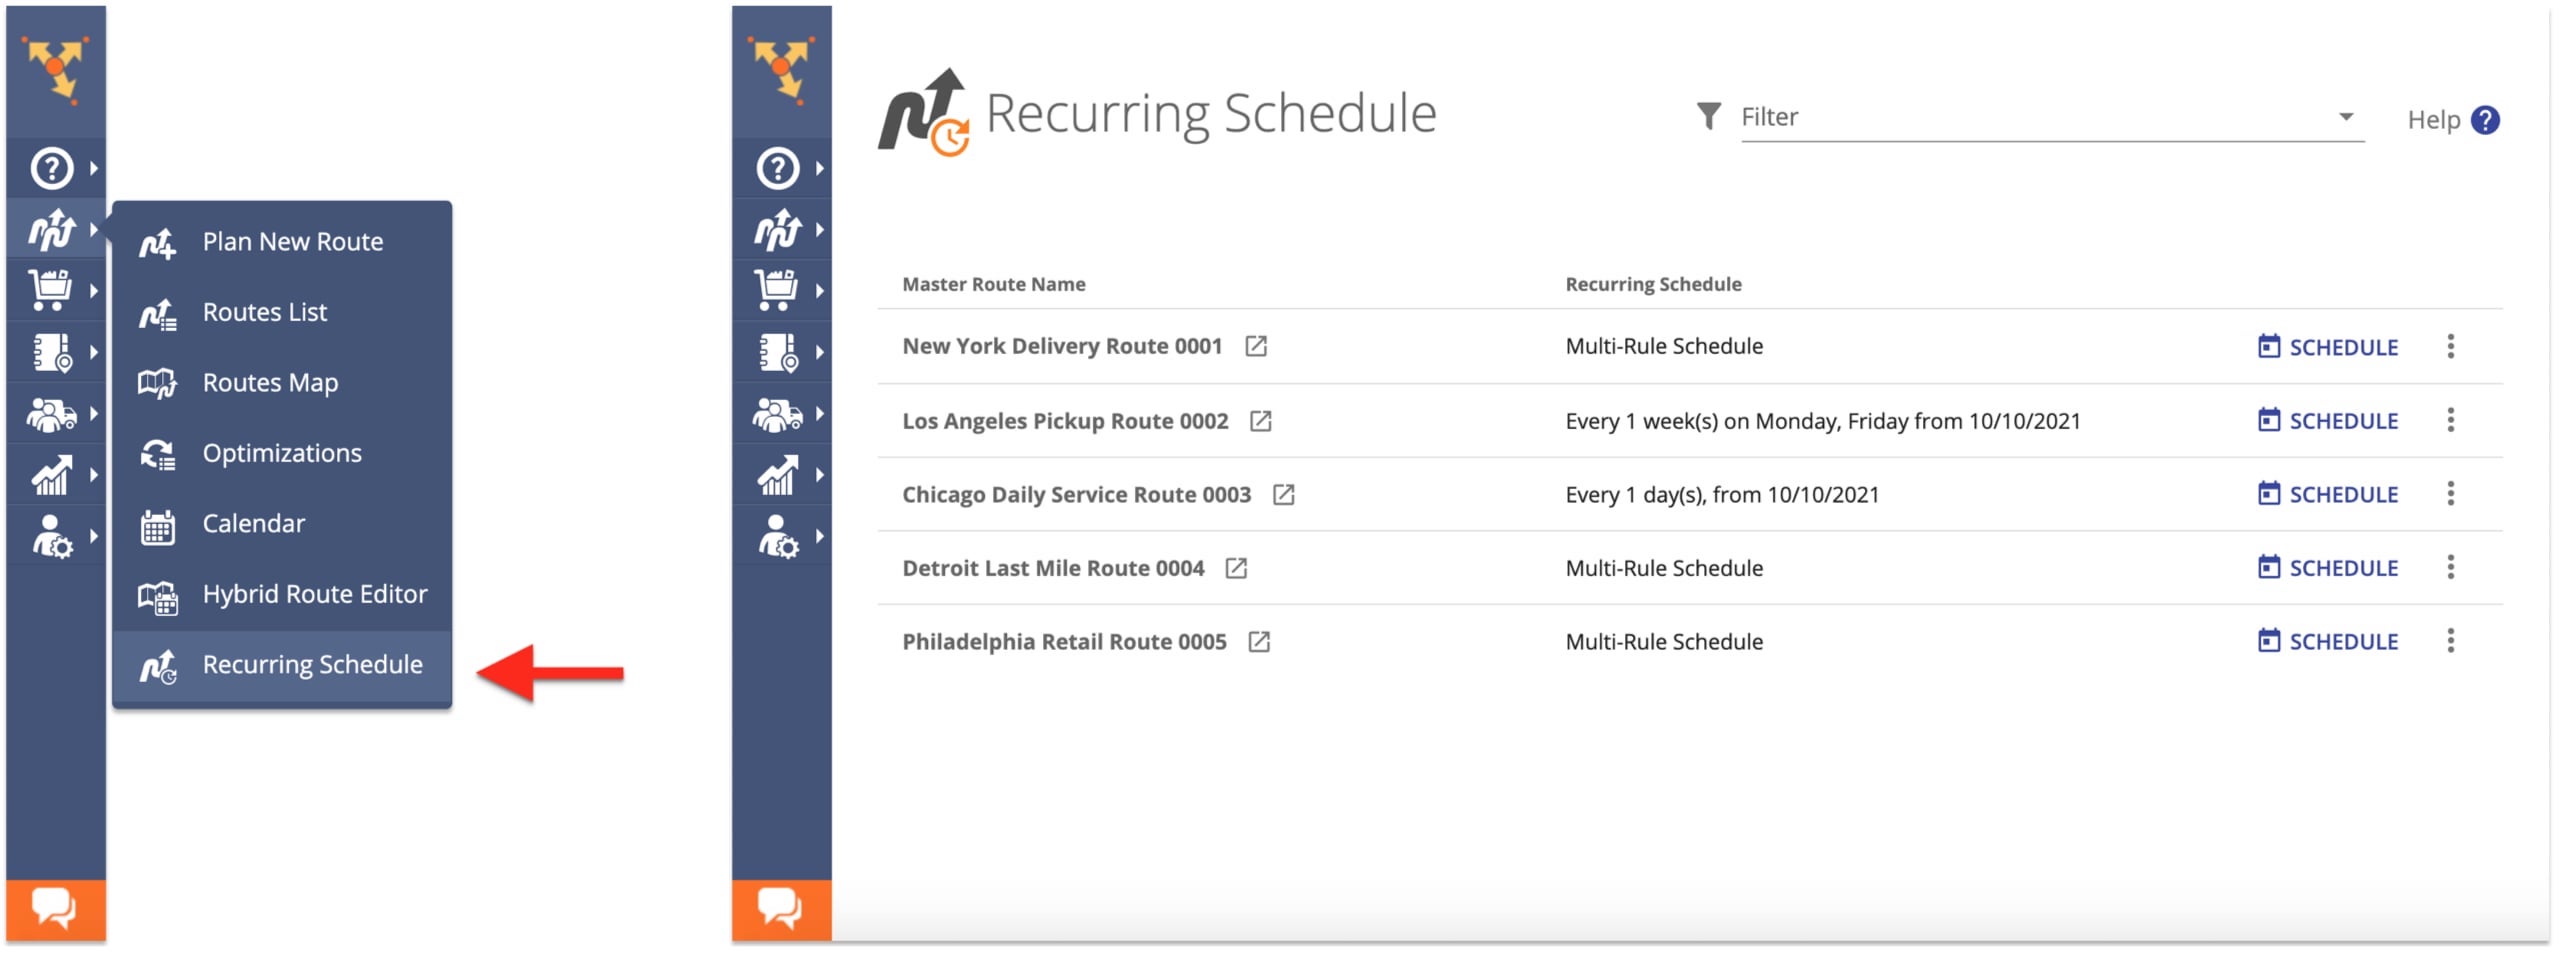 Go to Recurring Schedule from the navigation menu to see all Master Routes and Route Schedules.